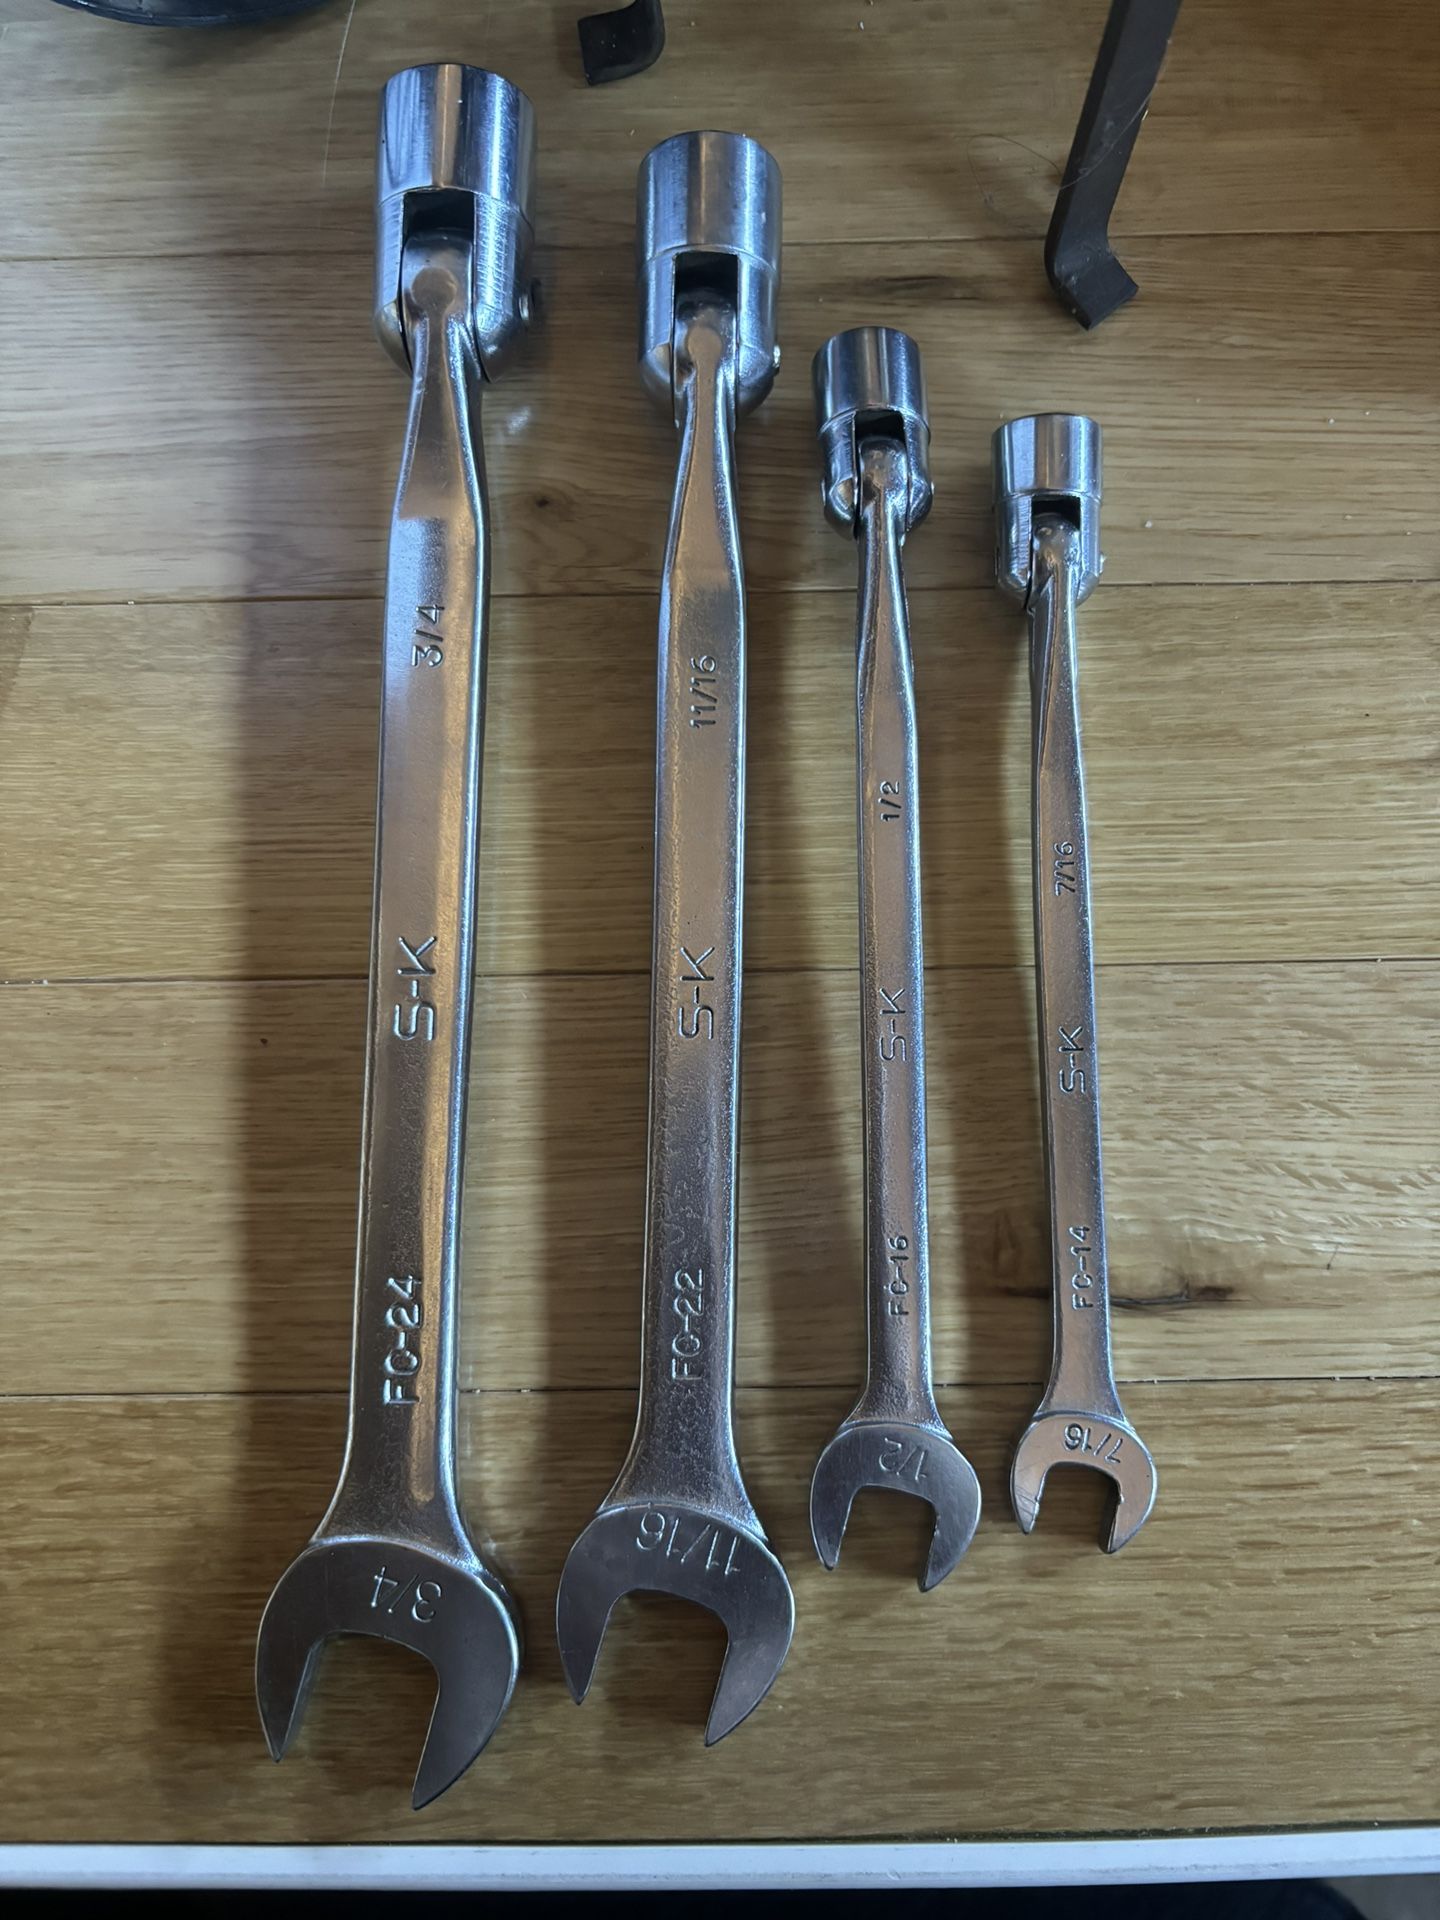 S-K TOOLS SK USA 6 pc Combination Open End WRENCH & SOCKET Set 7/16, 1/2, 11/16, 3/4